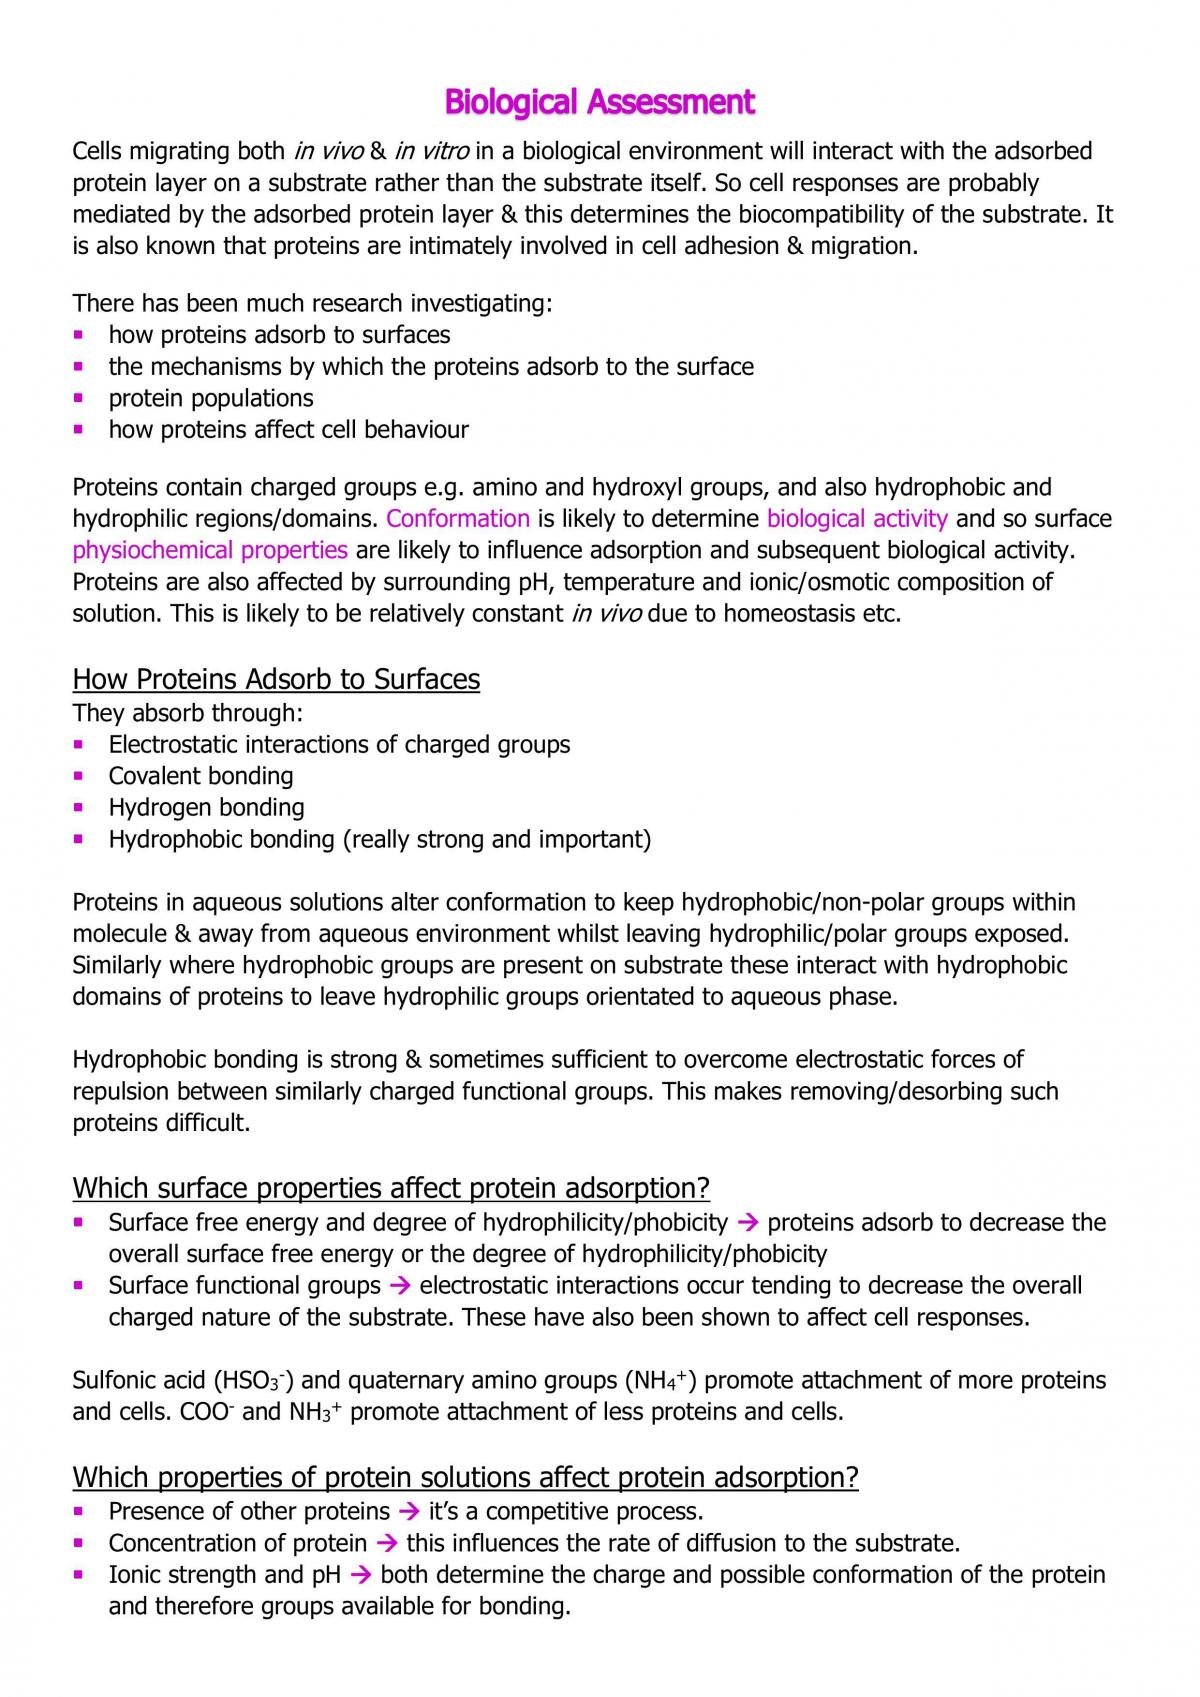 Laboratory Assessment of Biomaterials Module Notes - Page 23